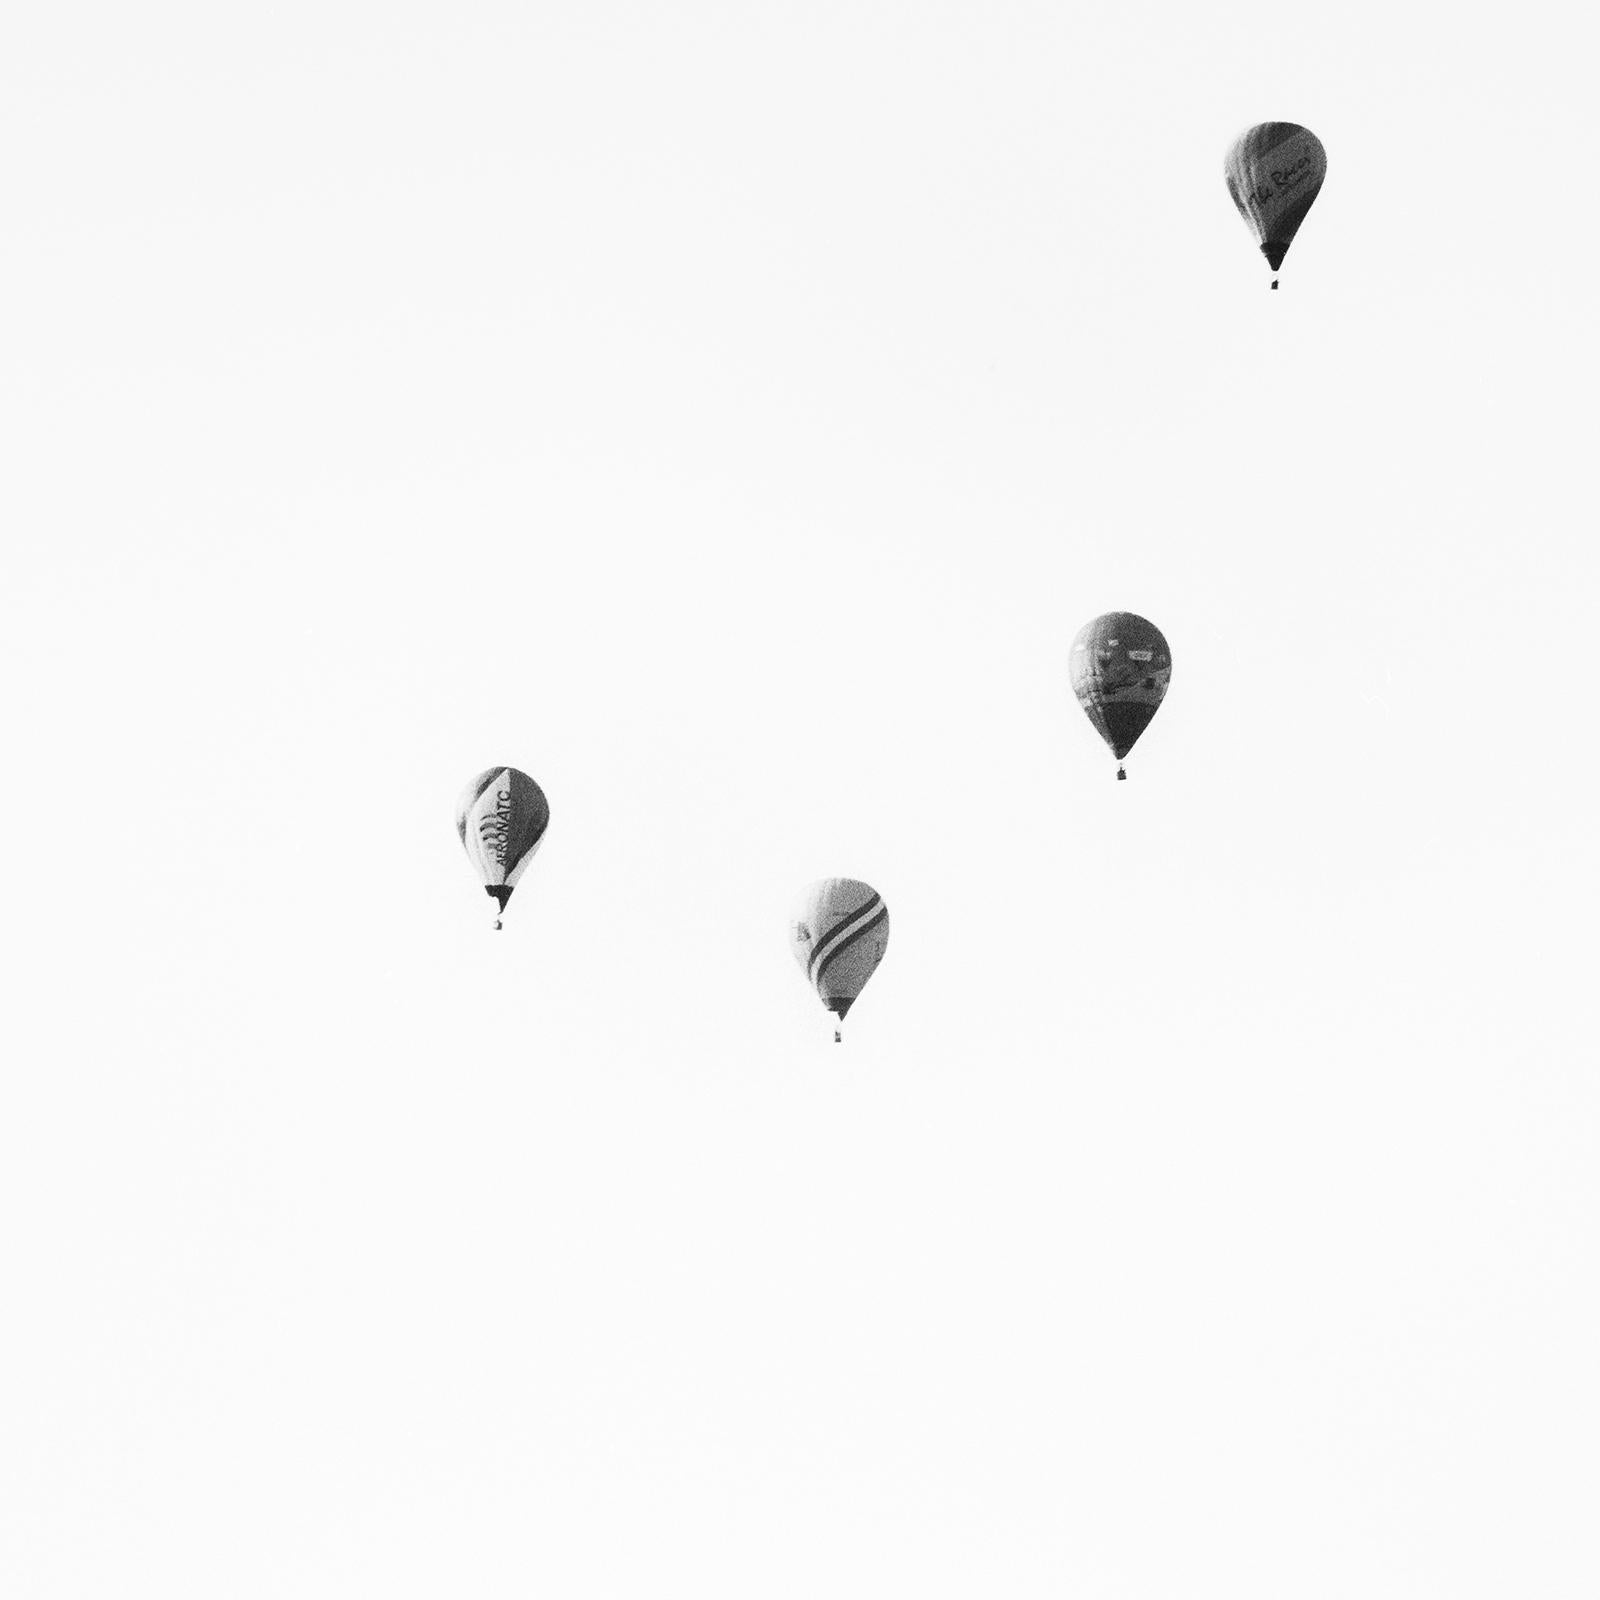 Hot Air Balloon, World Championship, black and white photography, landscape For Sale 4